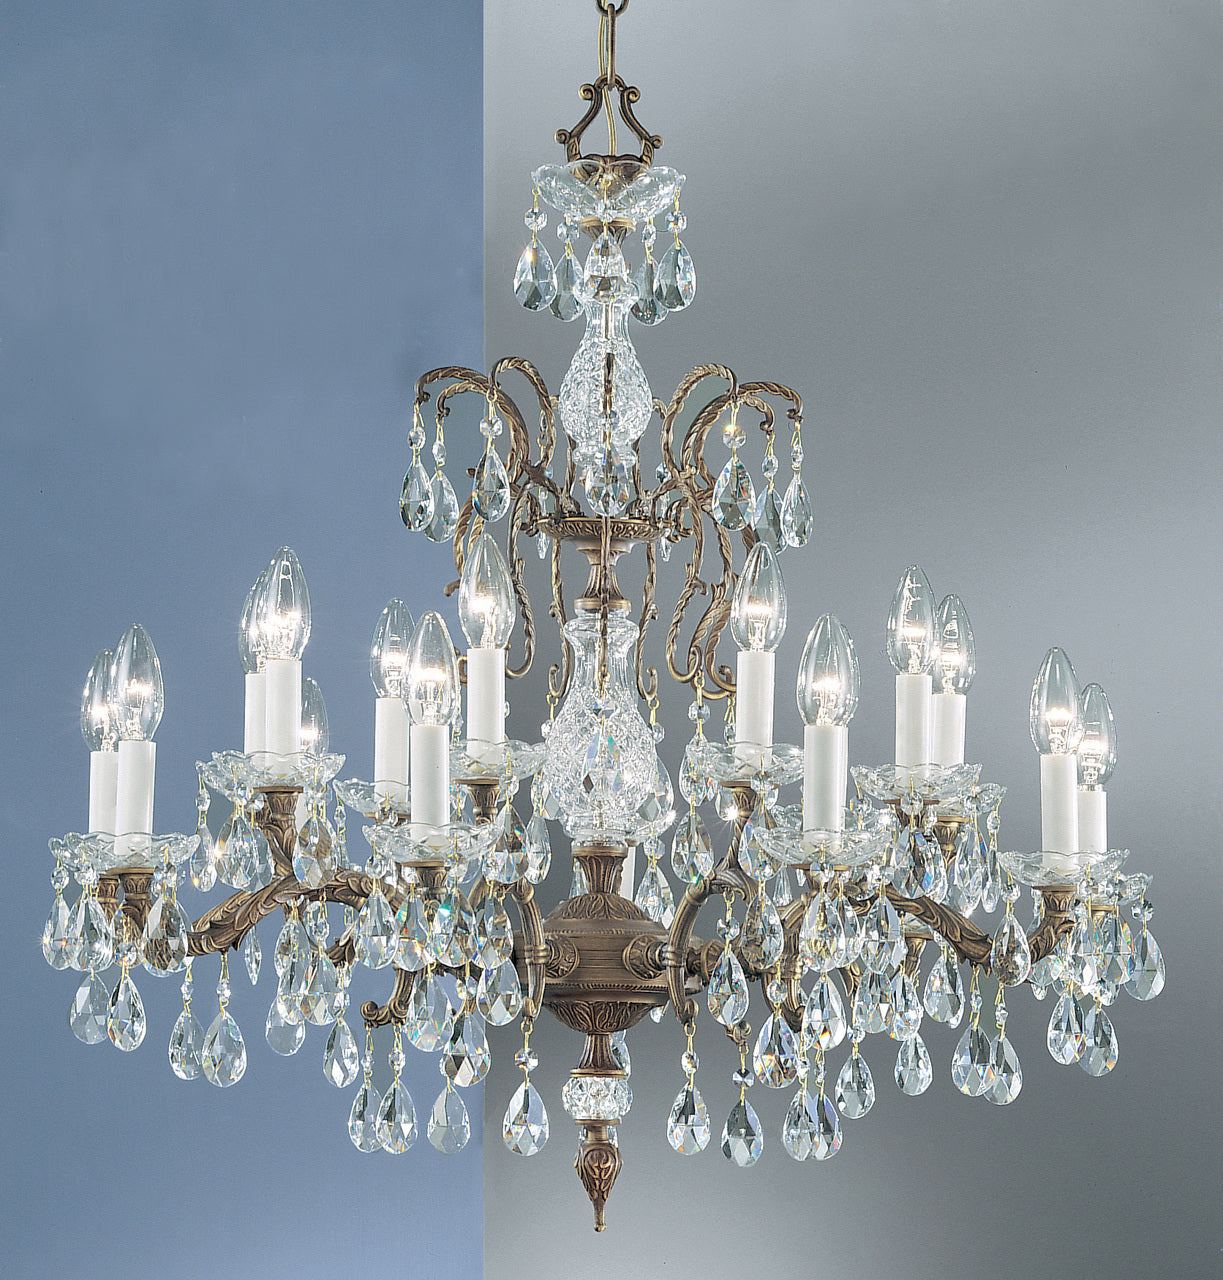 Classic Lighting 5538 OWB CGT Madrid Crystal/Cast Brass Chandelier in Olde World Bronze (Imported from Spain)